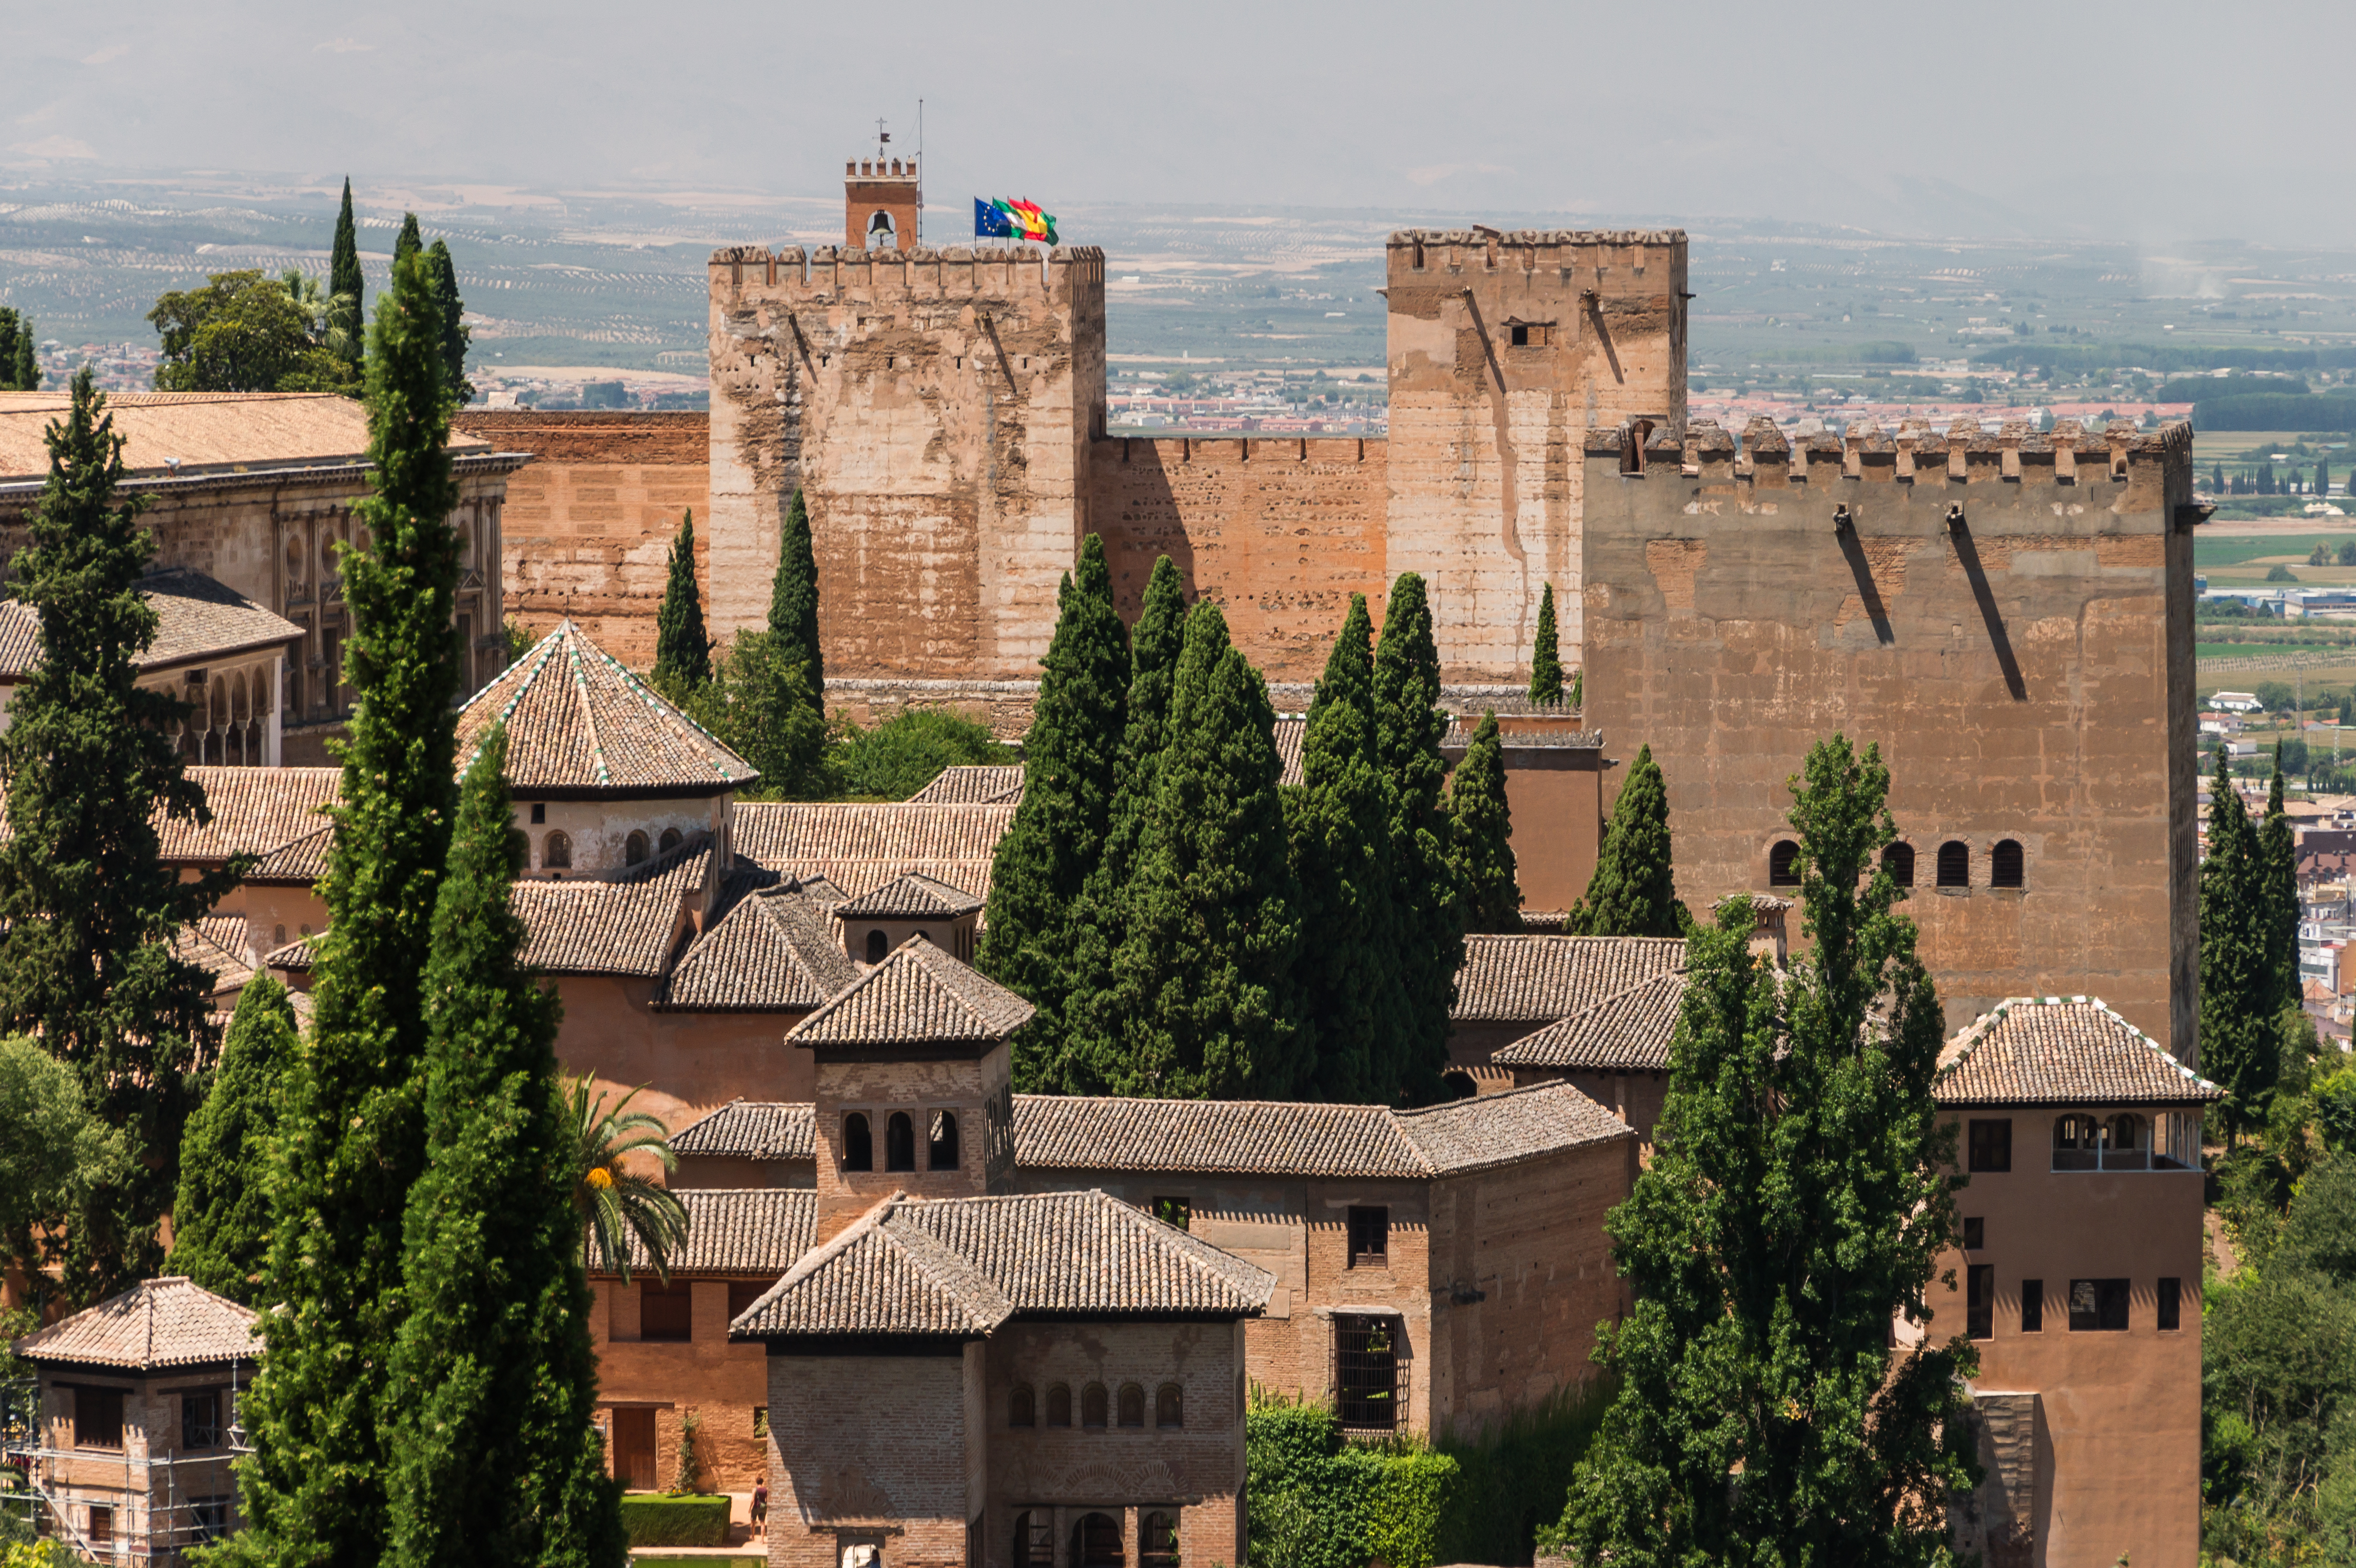 Roofs and towers of Alhambra from Generalife, Granada, Spain